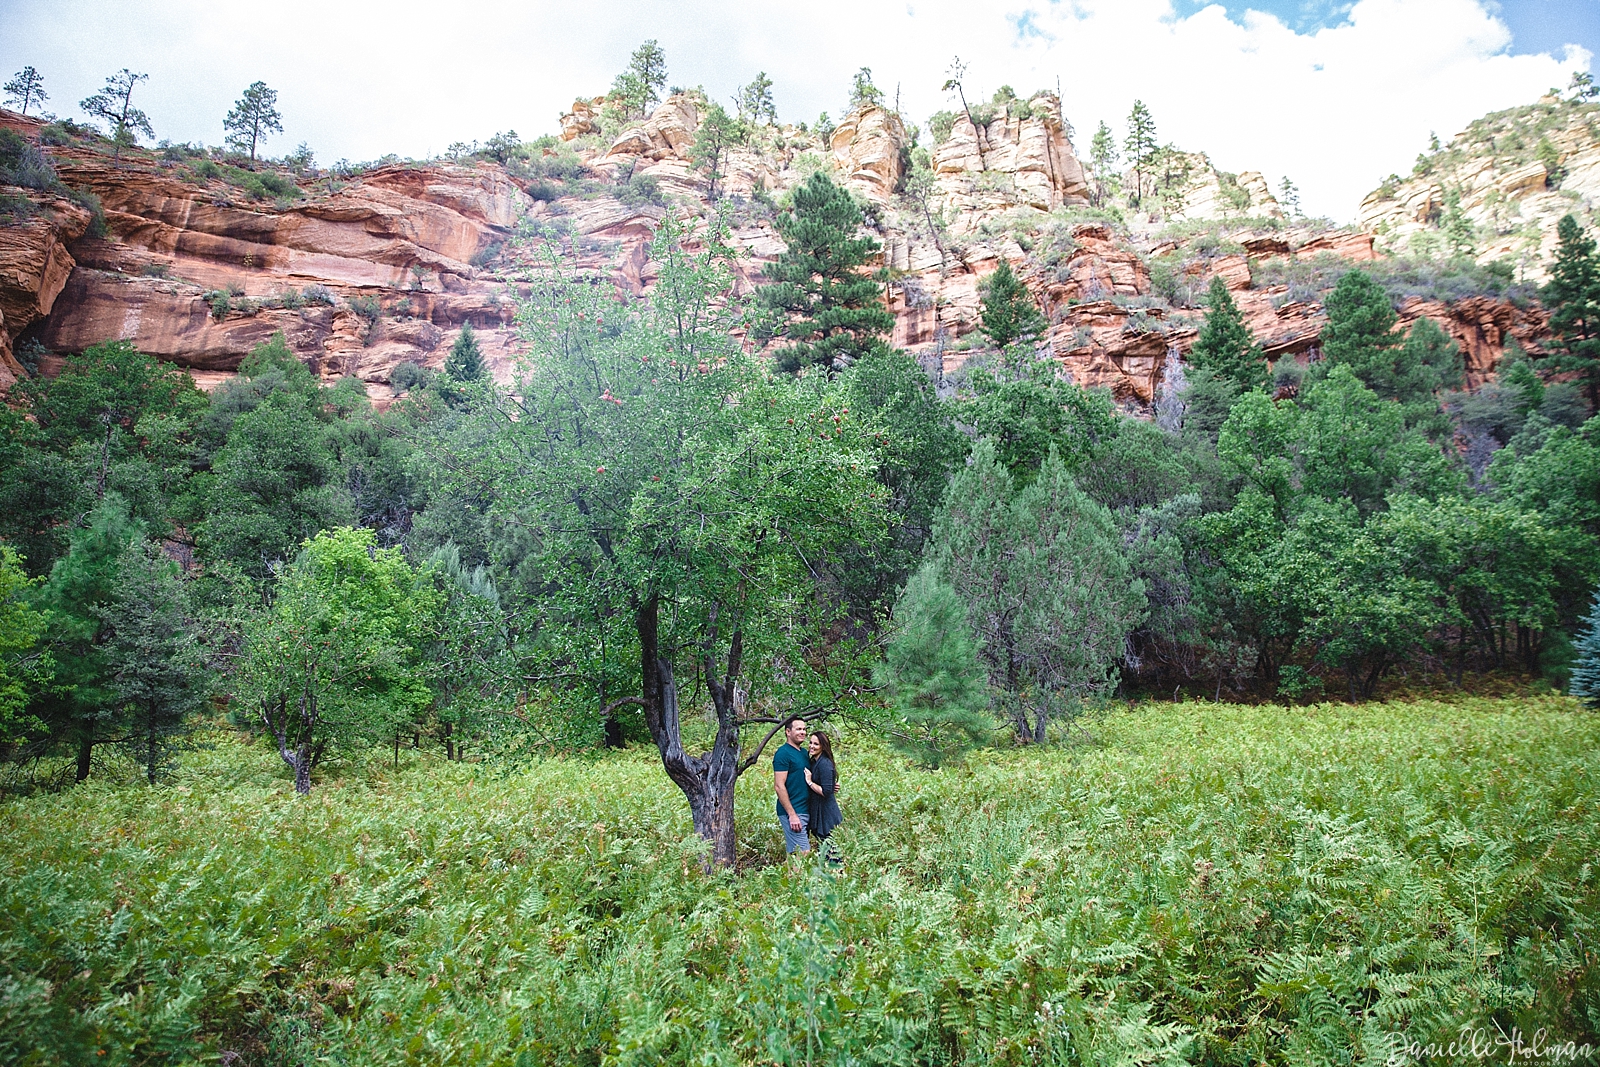 Couple in a field of ferns with red rock backdrop in Sedona